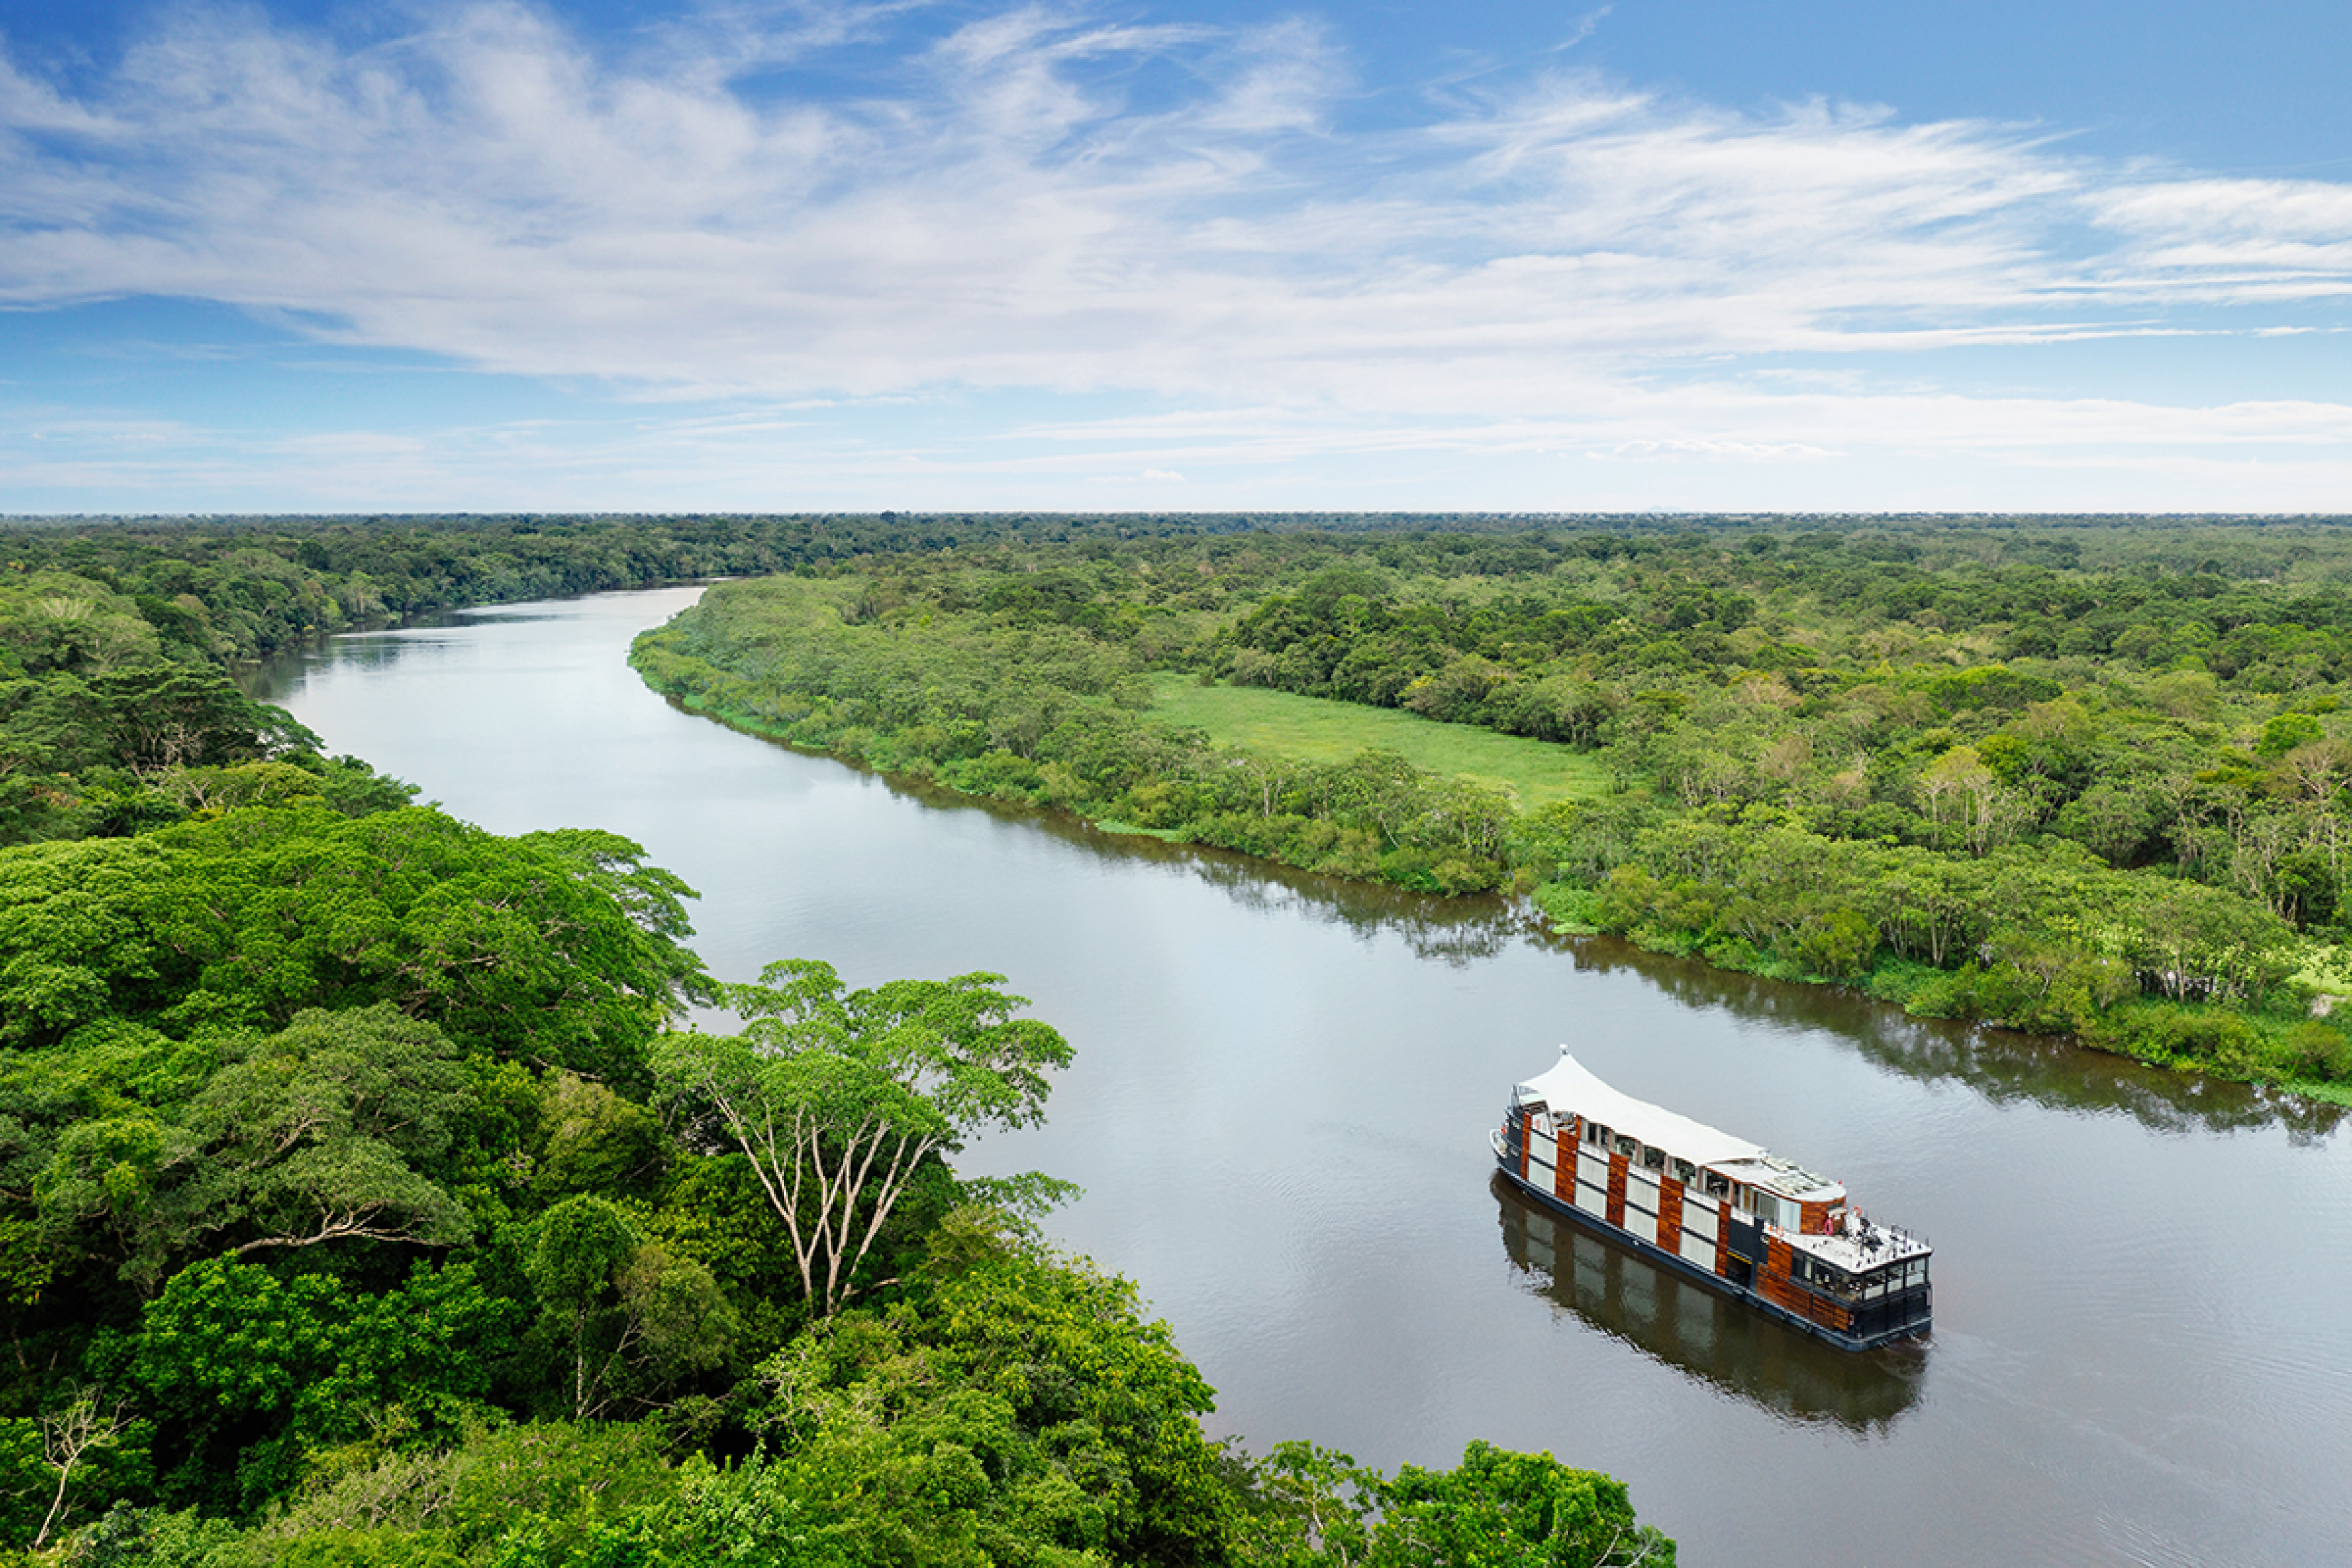 Aria Amazon on the river and surrounding jungle